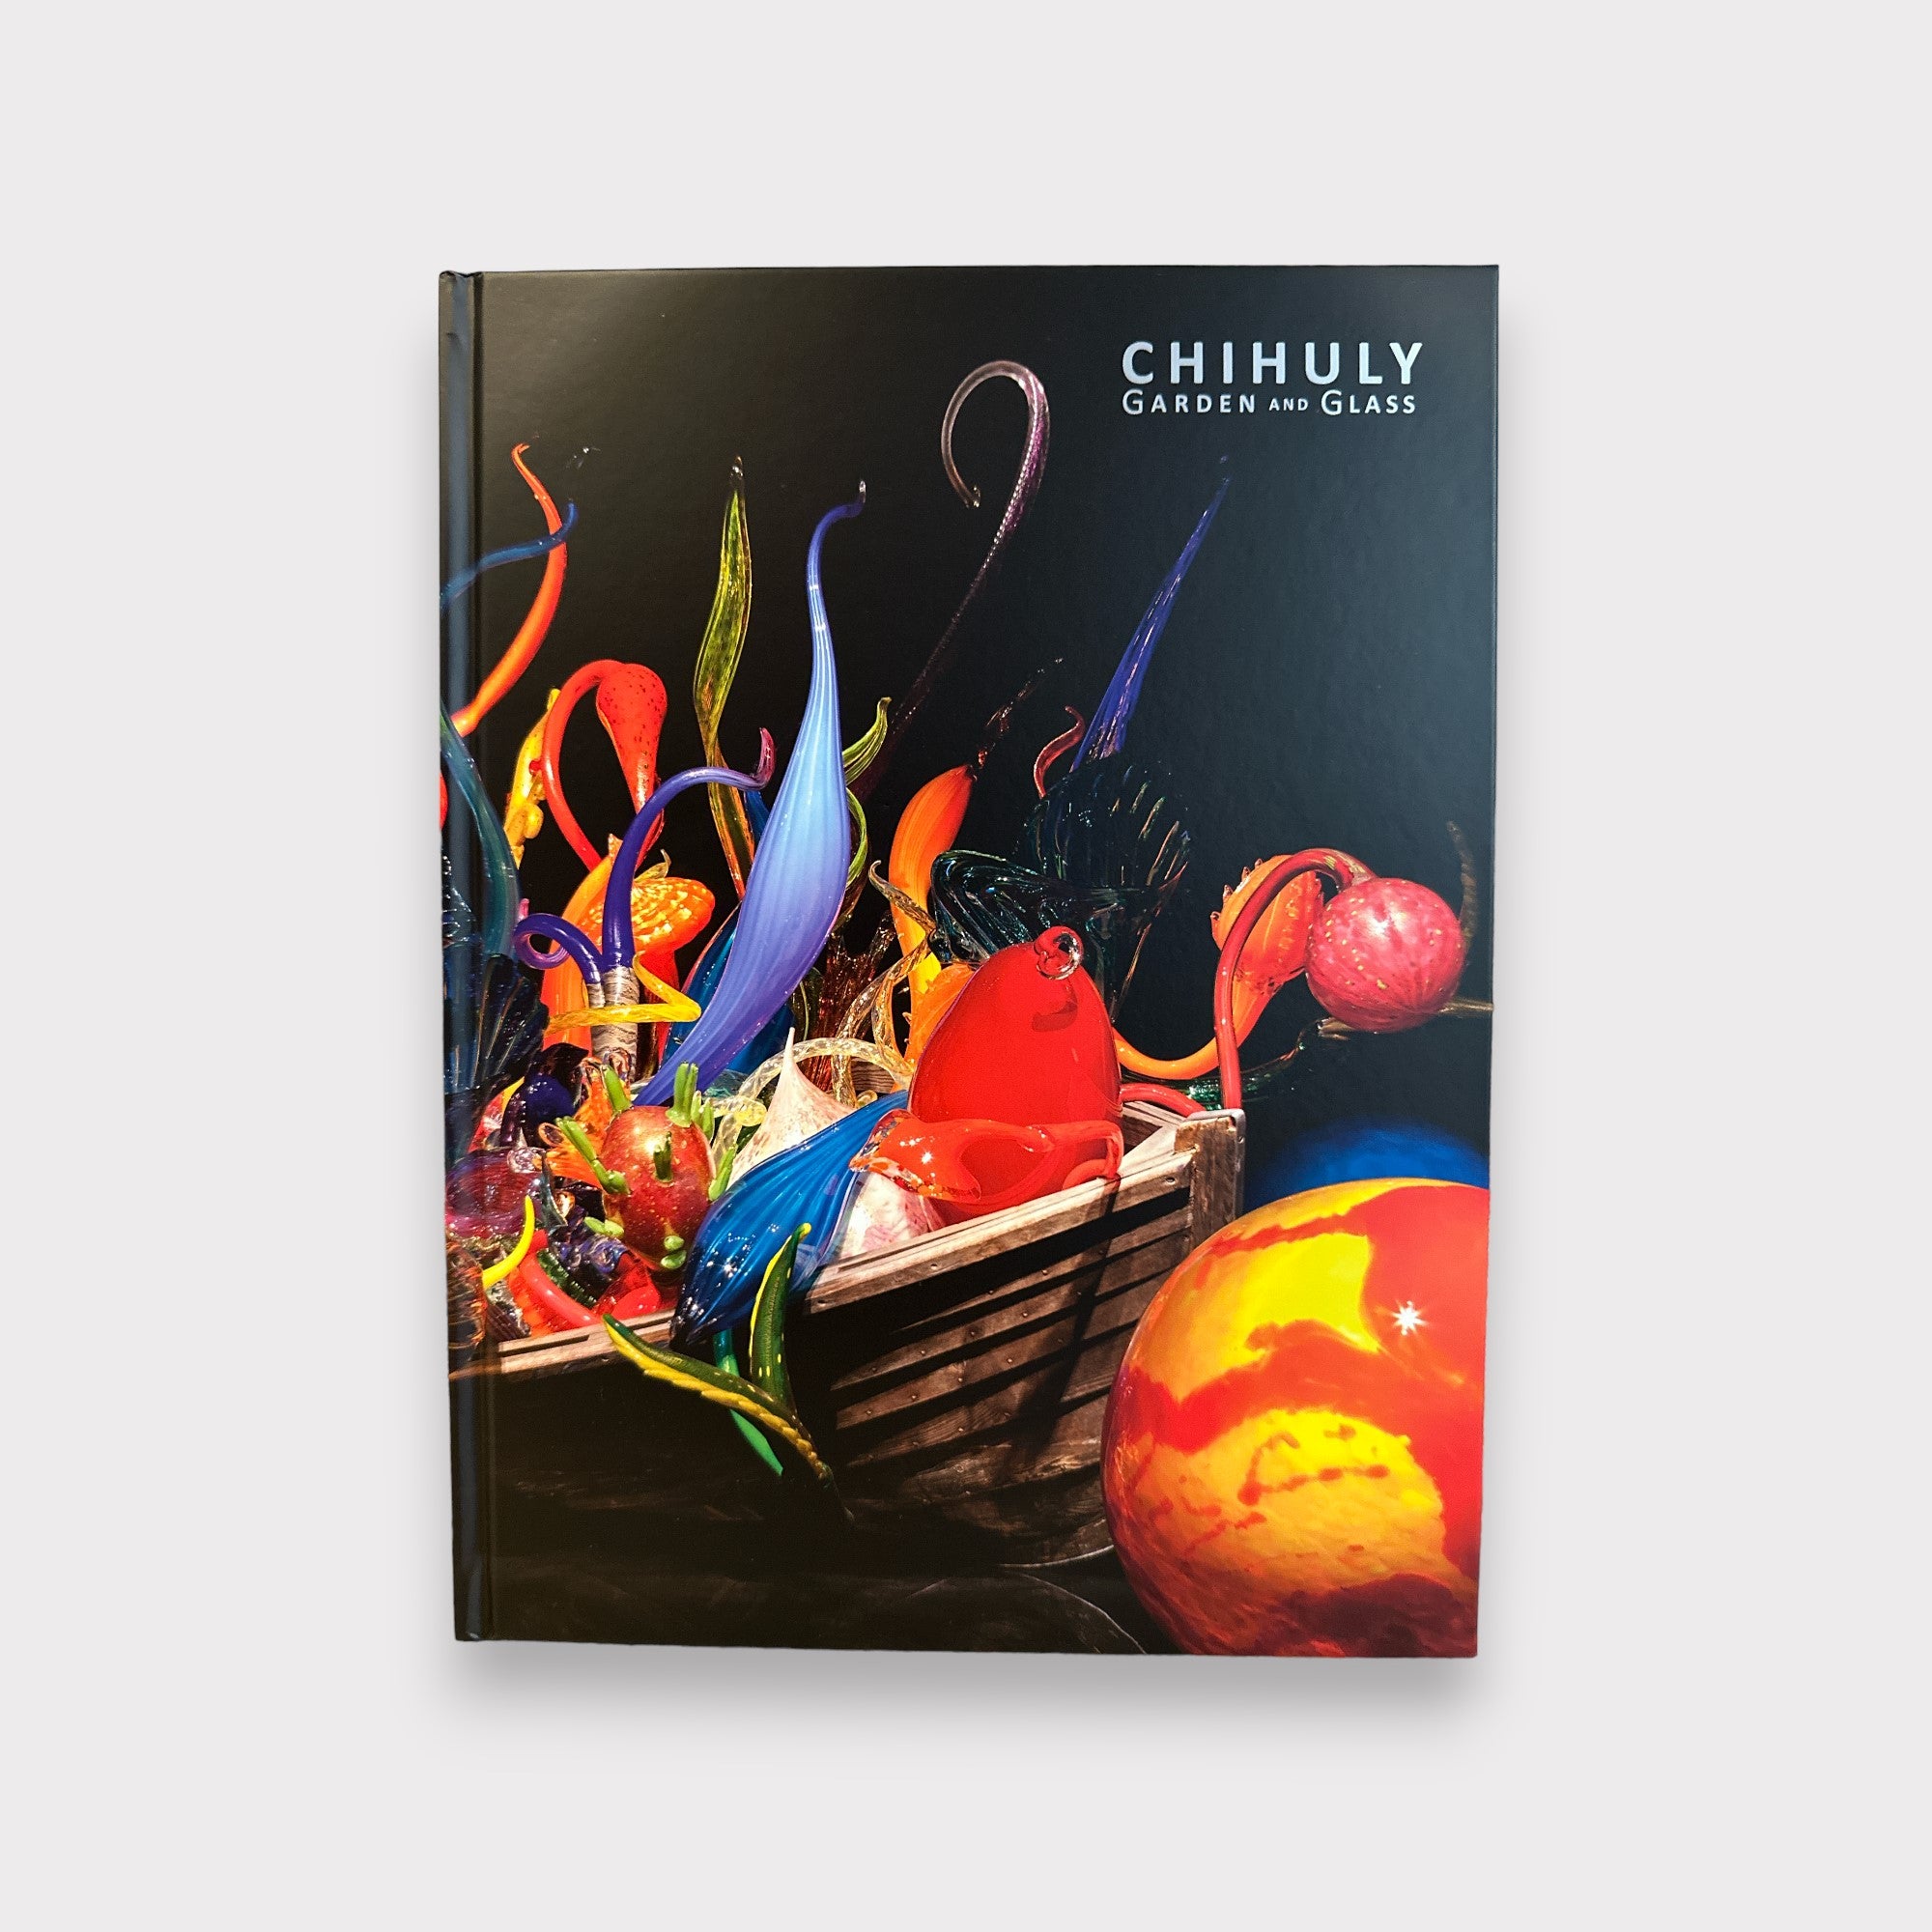 Chihuly Garden & Glass Exhibition Catalog